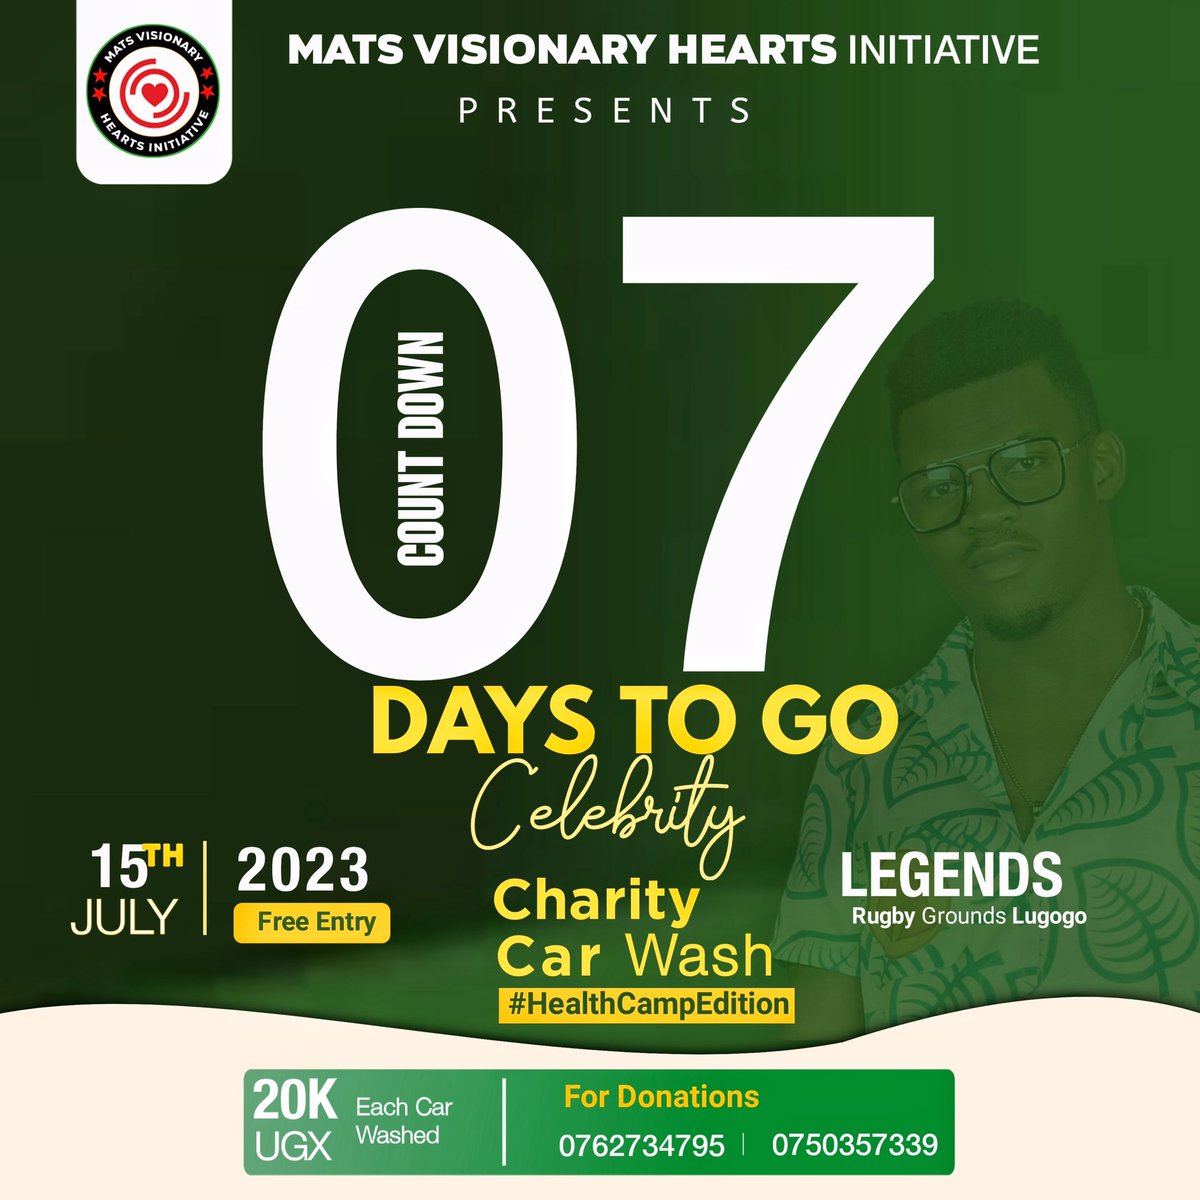 This is not so much to ask😒
Just come through and have fun🥲🤲🏾
#celebritycharitycarwash
#HealthCampEdition
#MatsVisionaryHeartsInitiative
#Lugogo